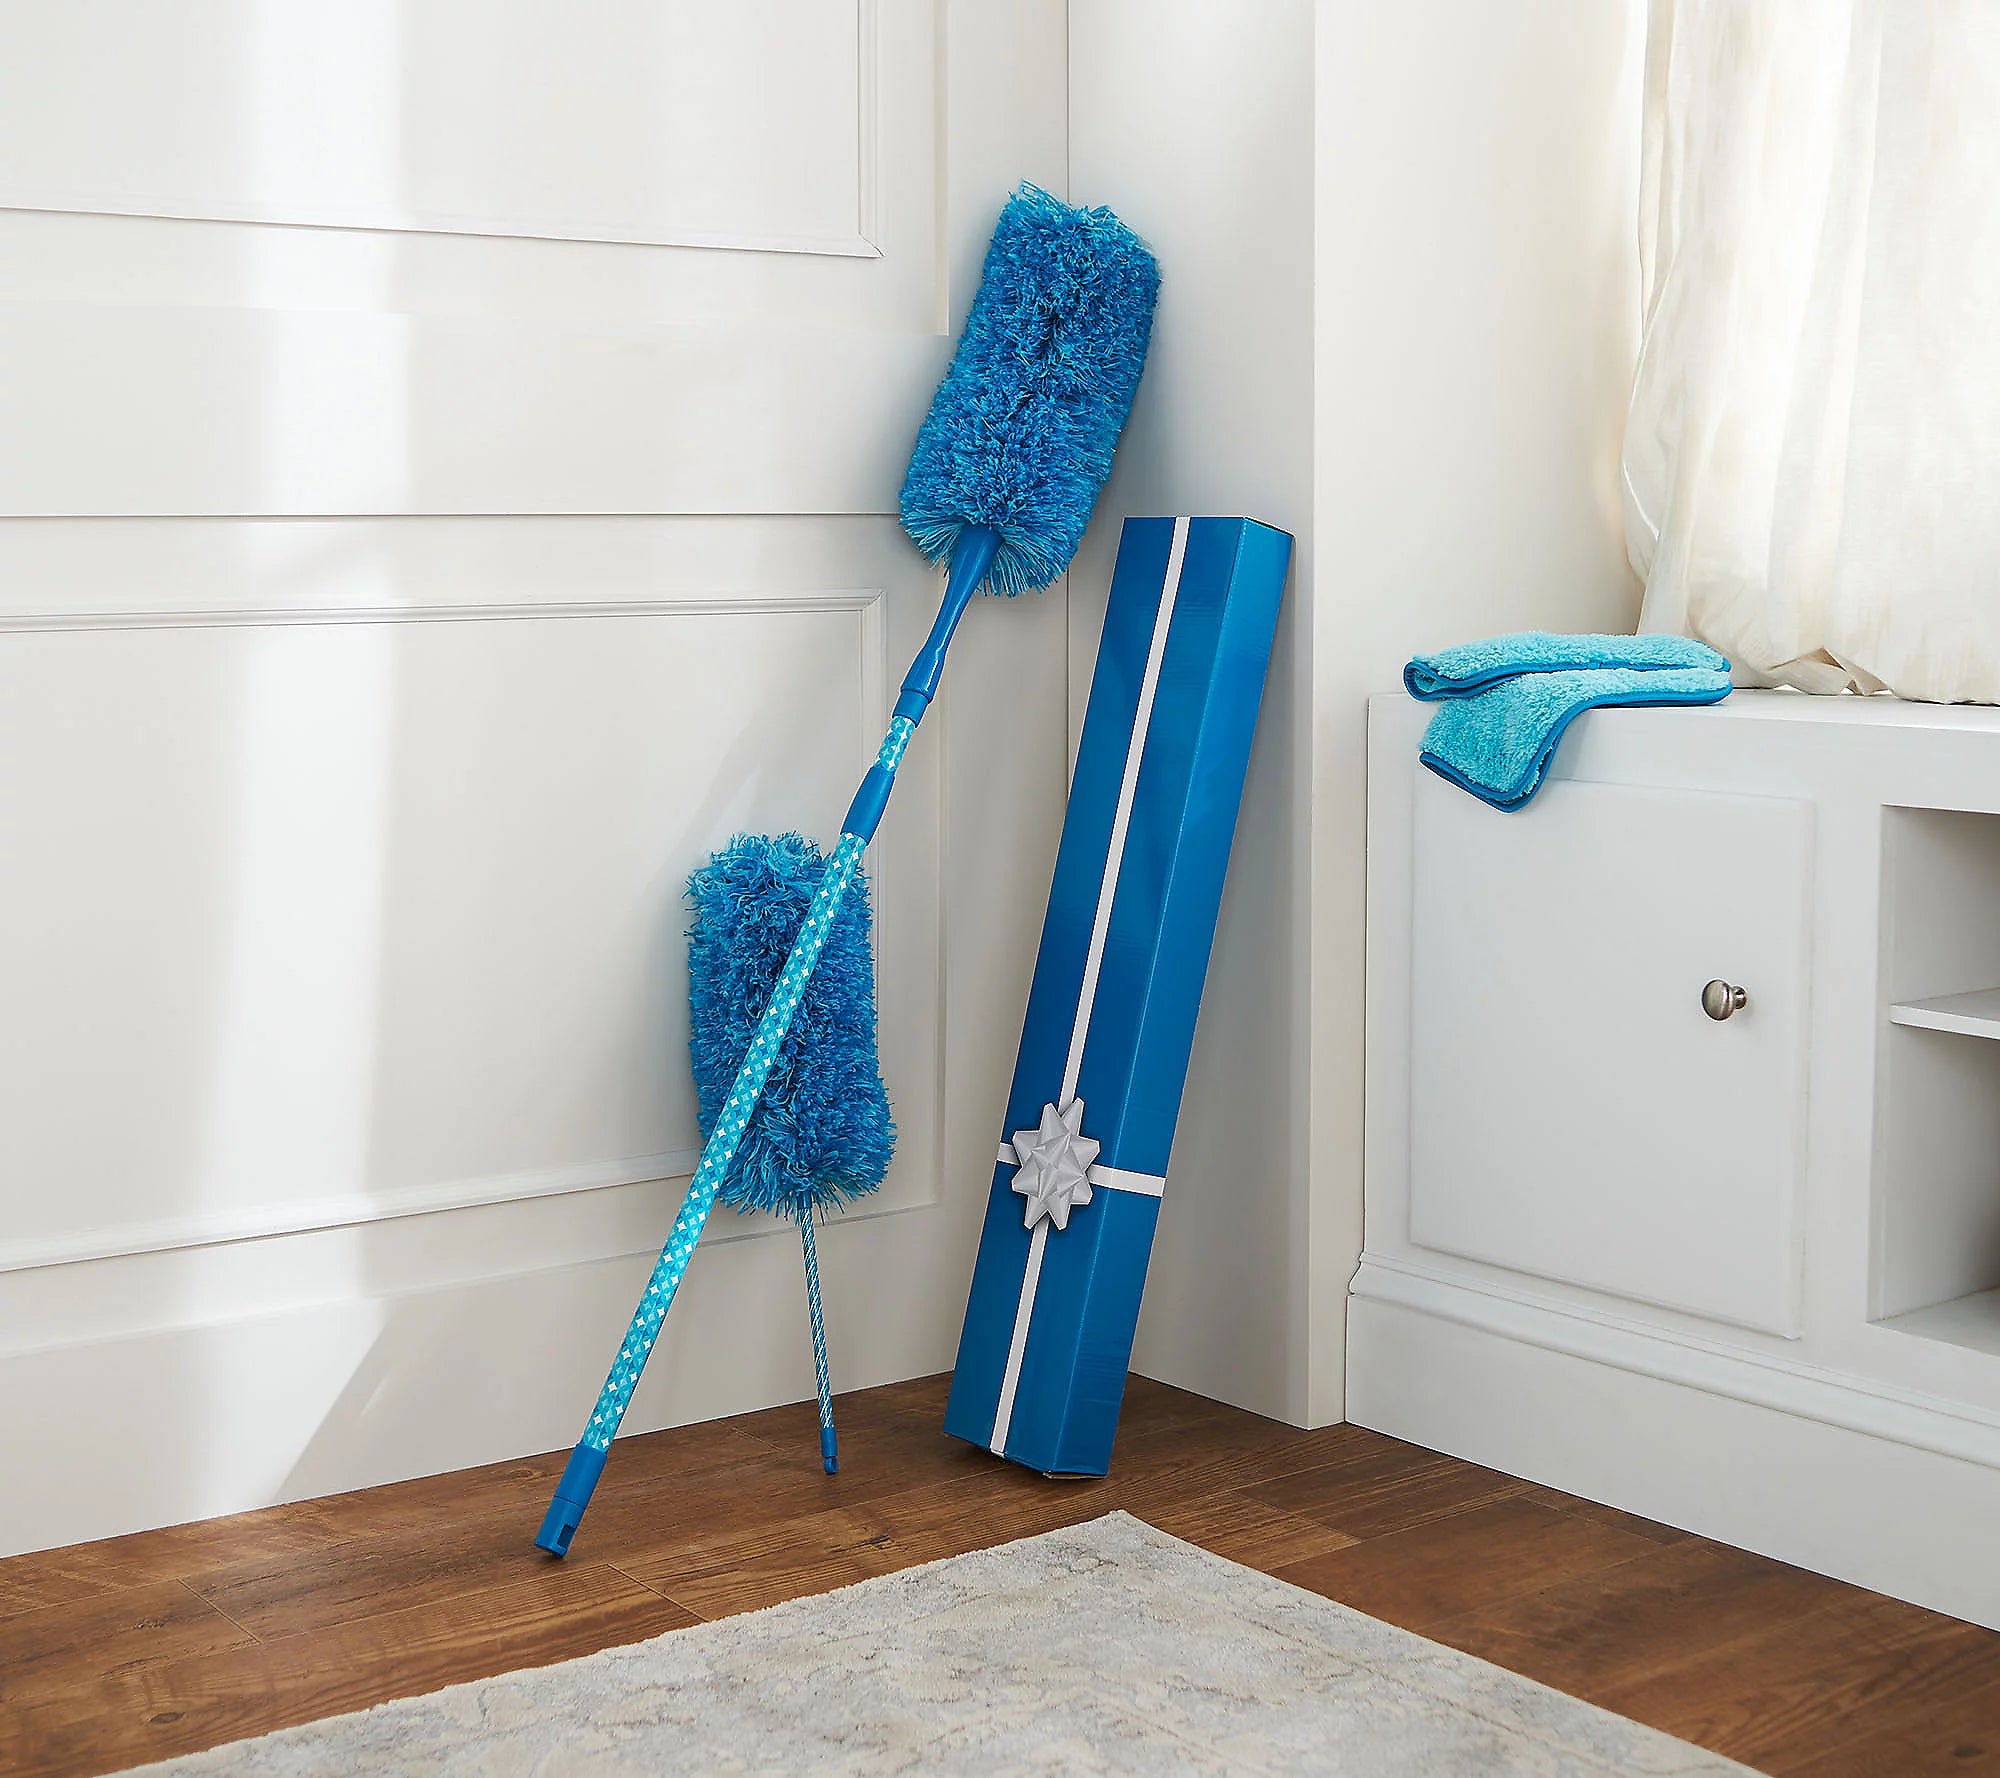 Set of (2) 5-Pc Microfiber Duster Sets with Gift Boxes by Campanelli - Sea Glass